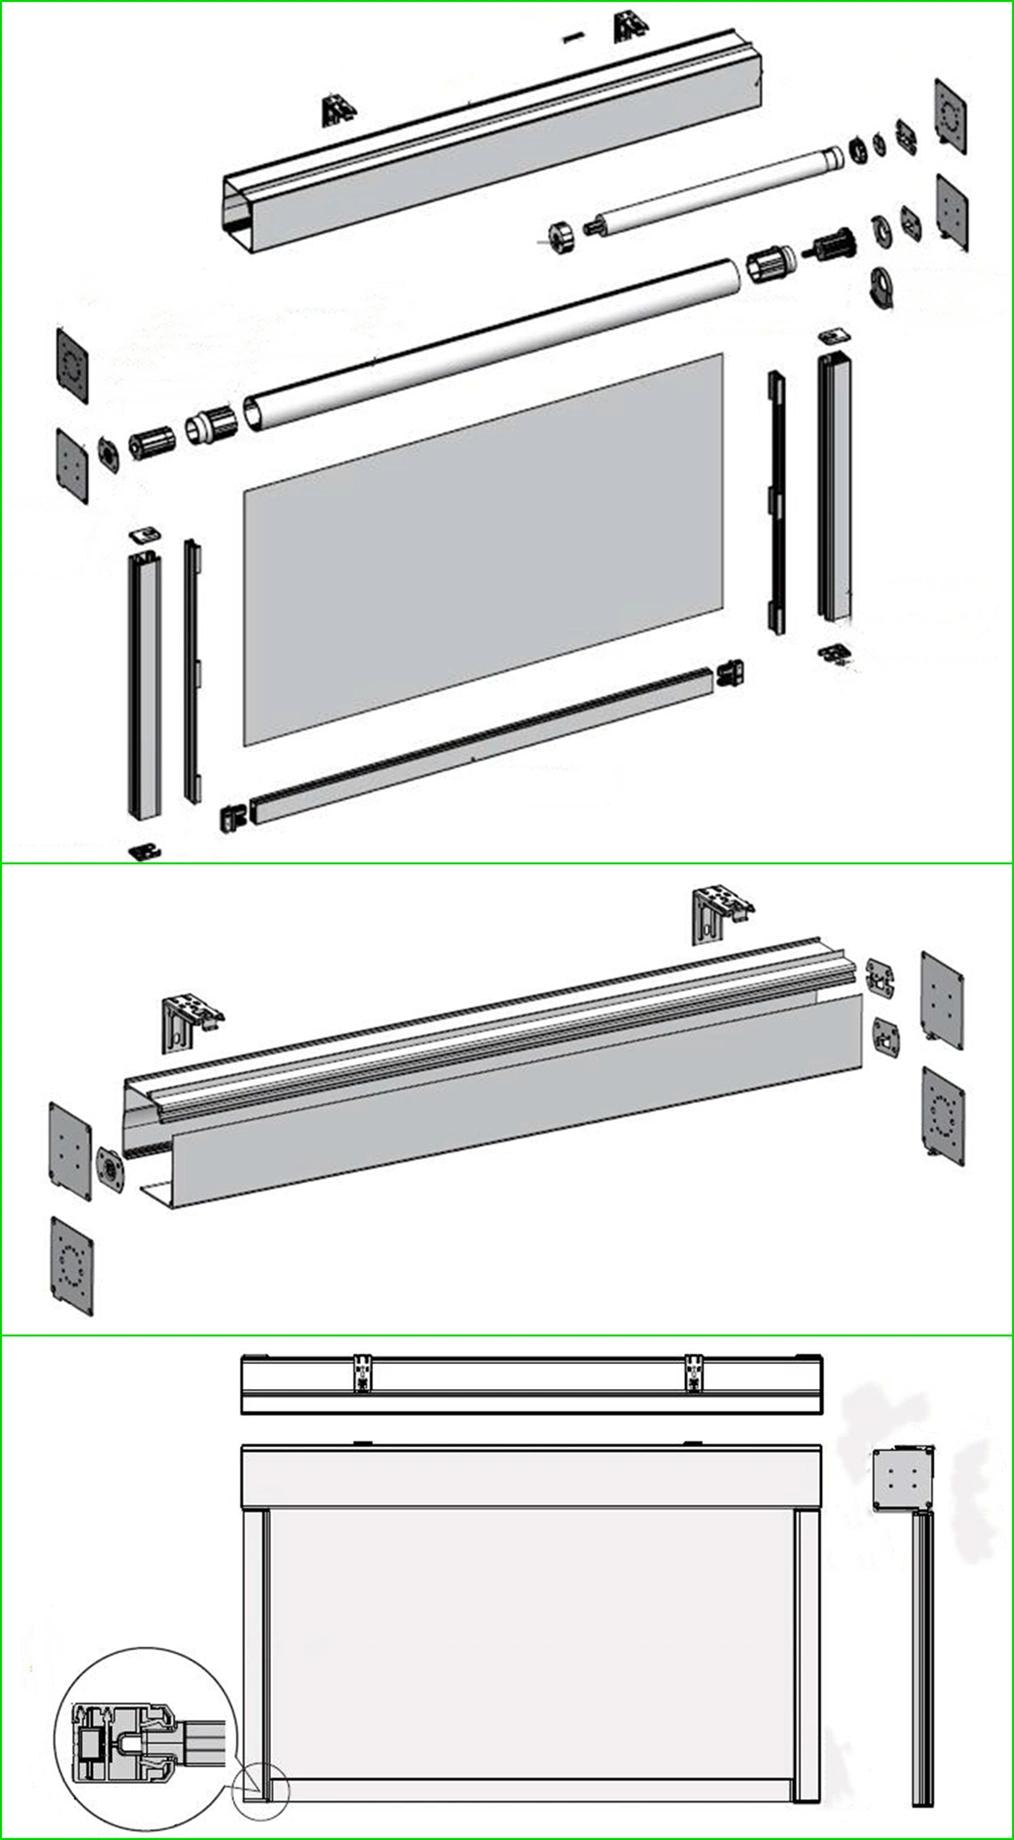 Window Roller Blinds Blackout Fabric Mechain Parts From The Bottom up Components Accessories Suppliers Zip Pull Cord